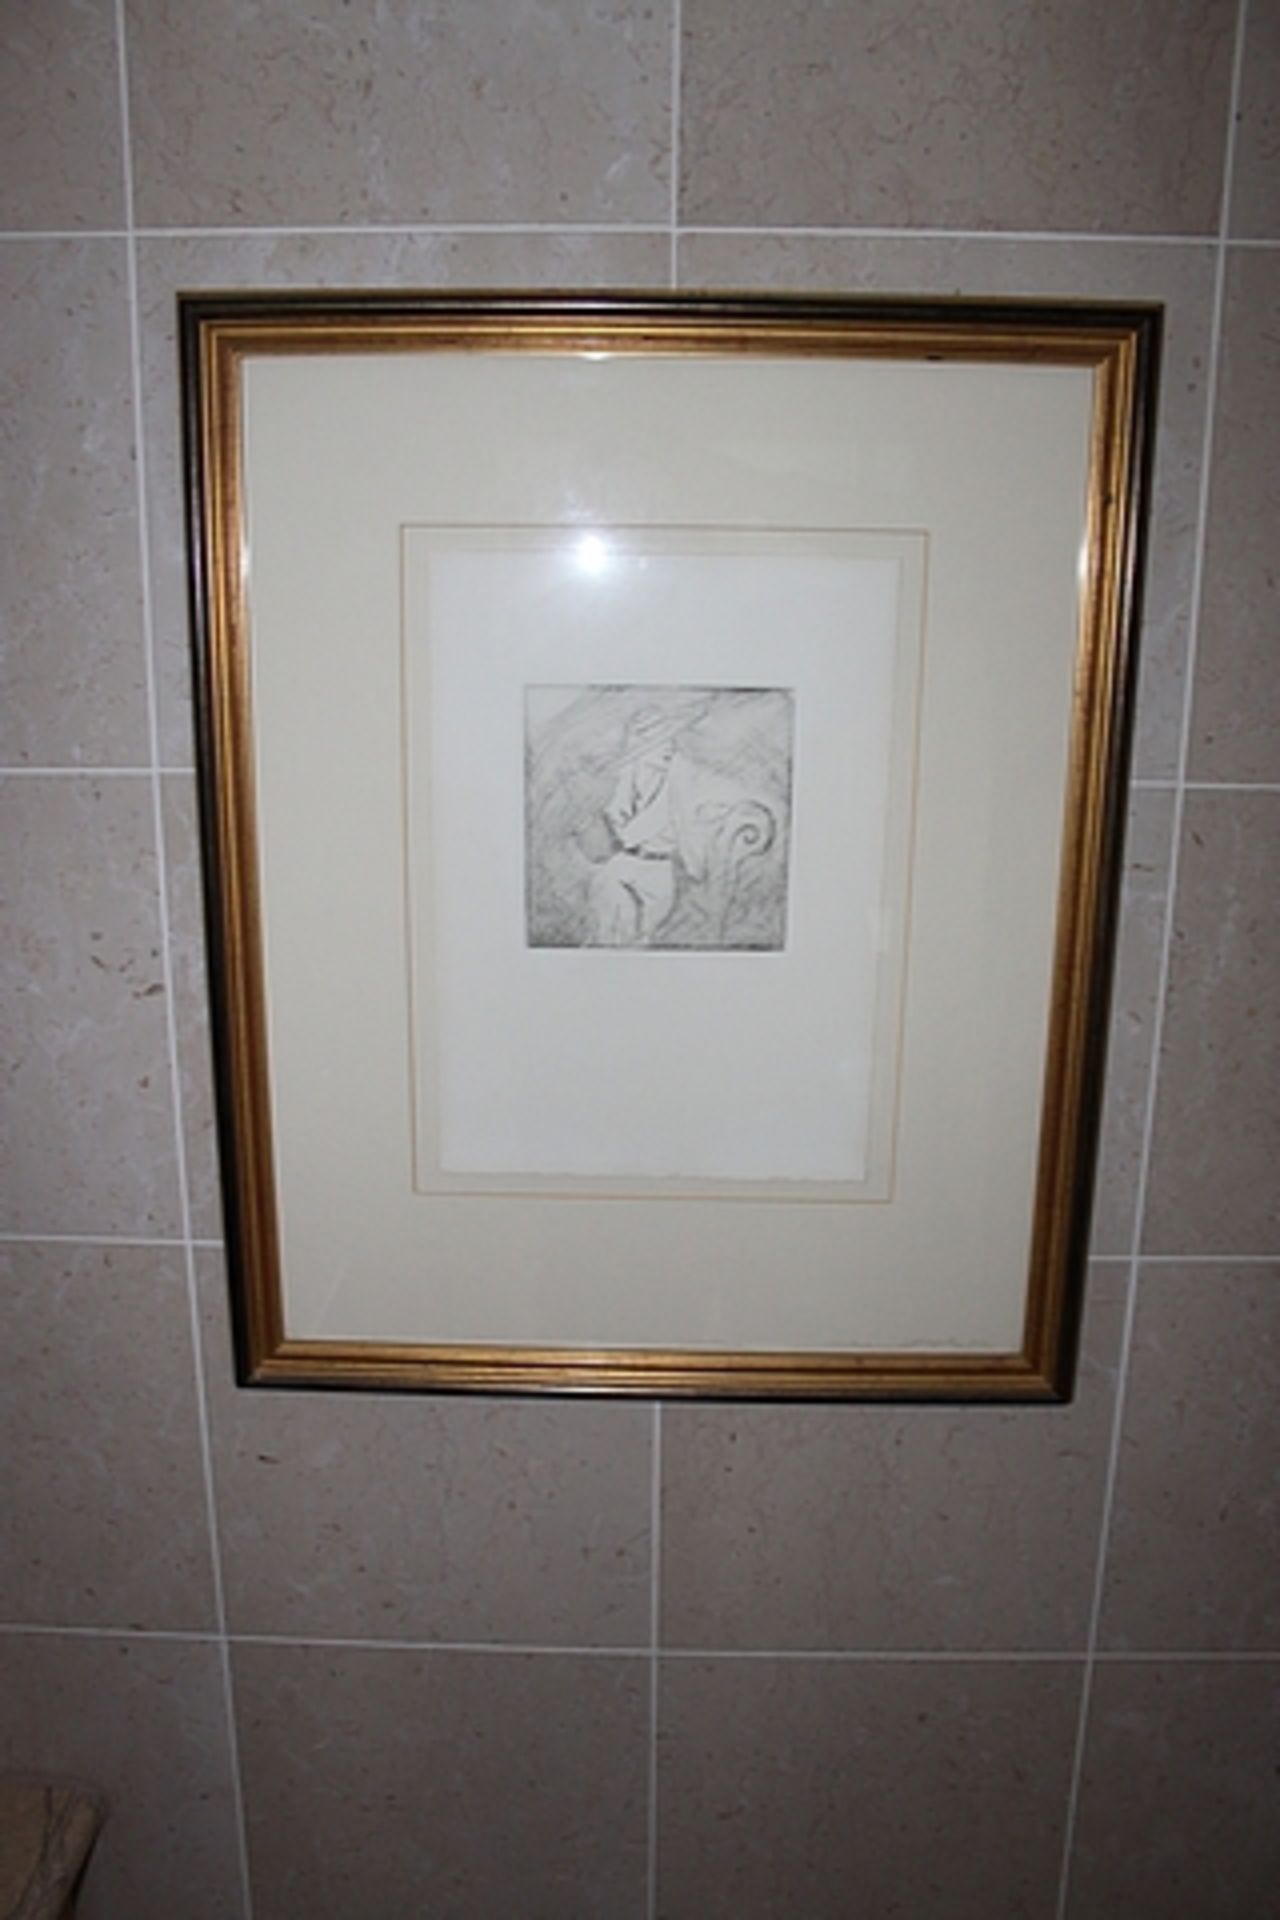 Abstract art pencil and charcoal gilt framed 540mm x 650mm